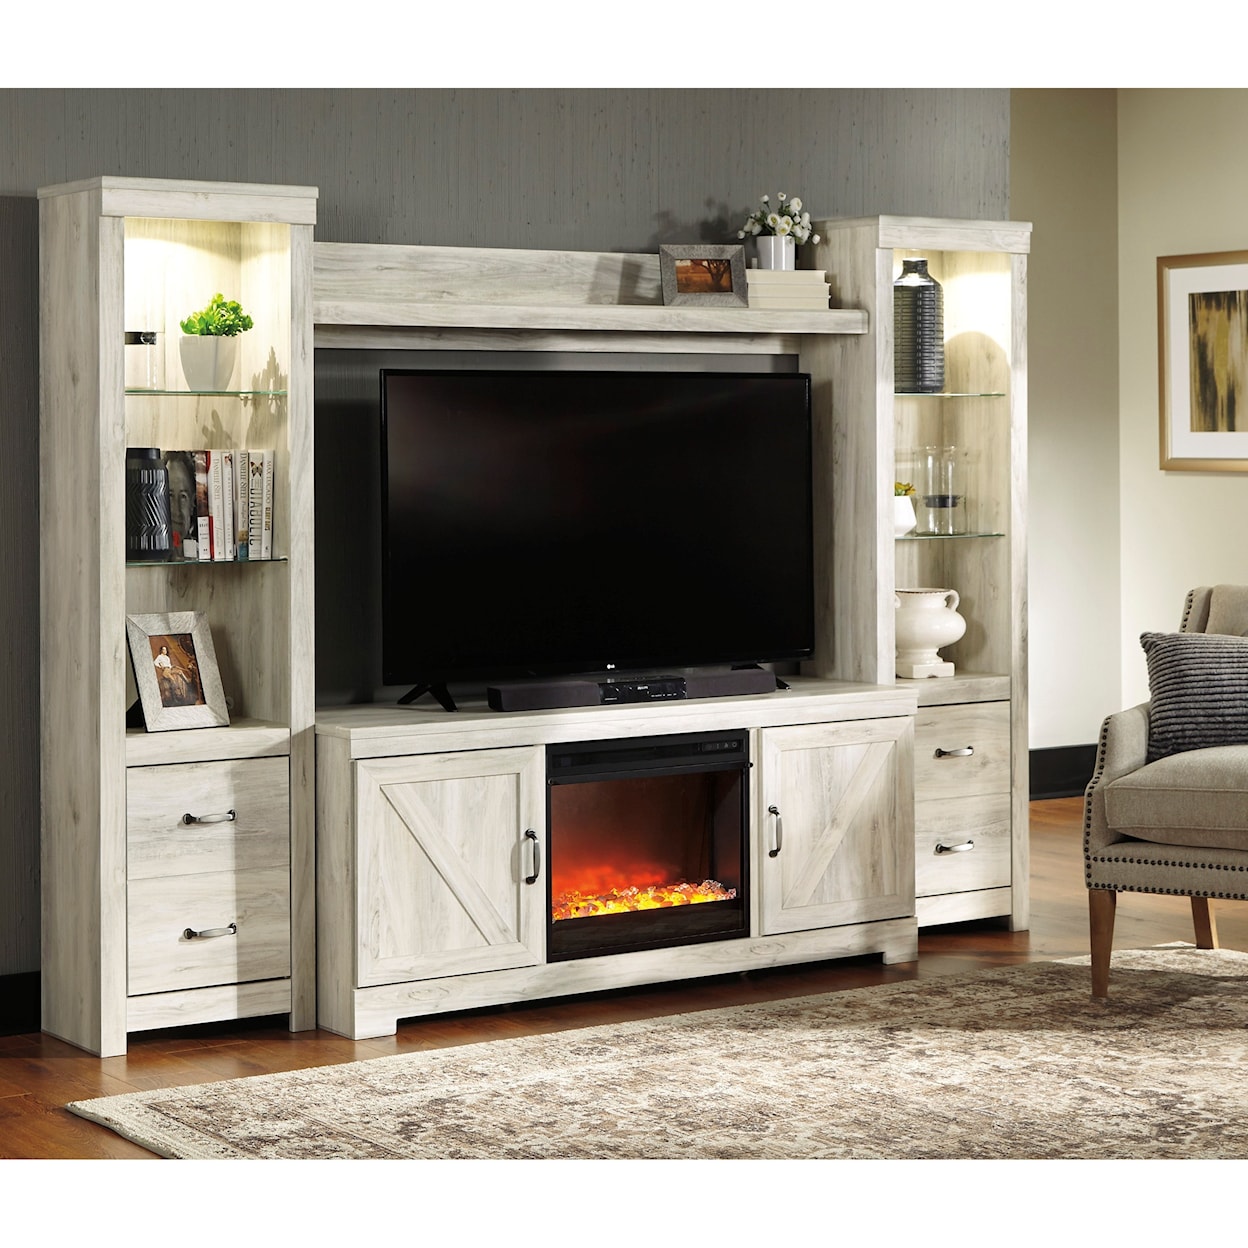 Ashley Furniture Signature Design Bellaby Wall Unit with Fireplace